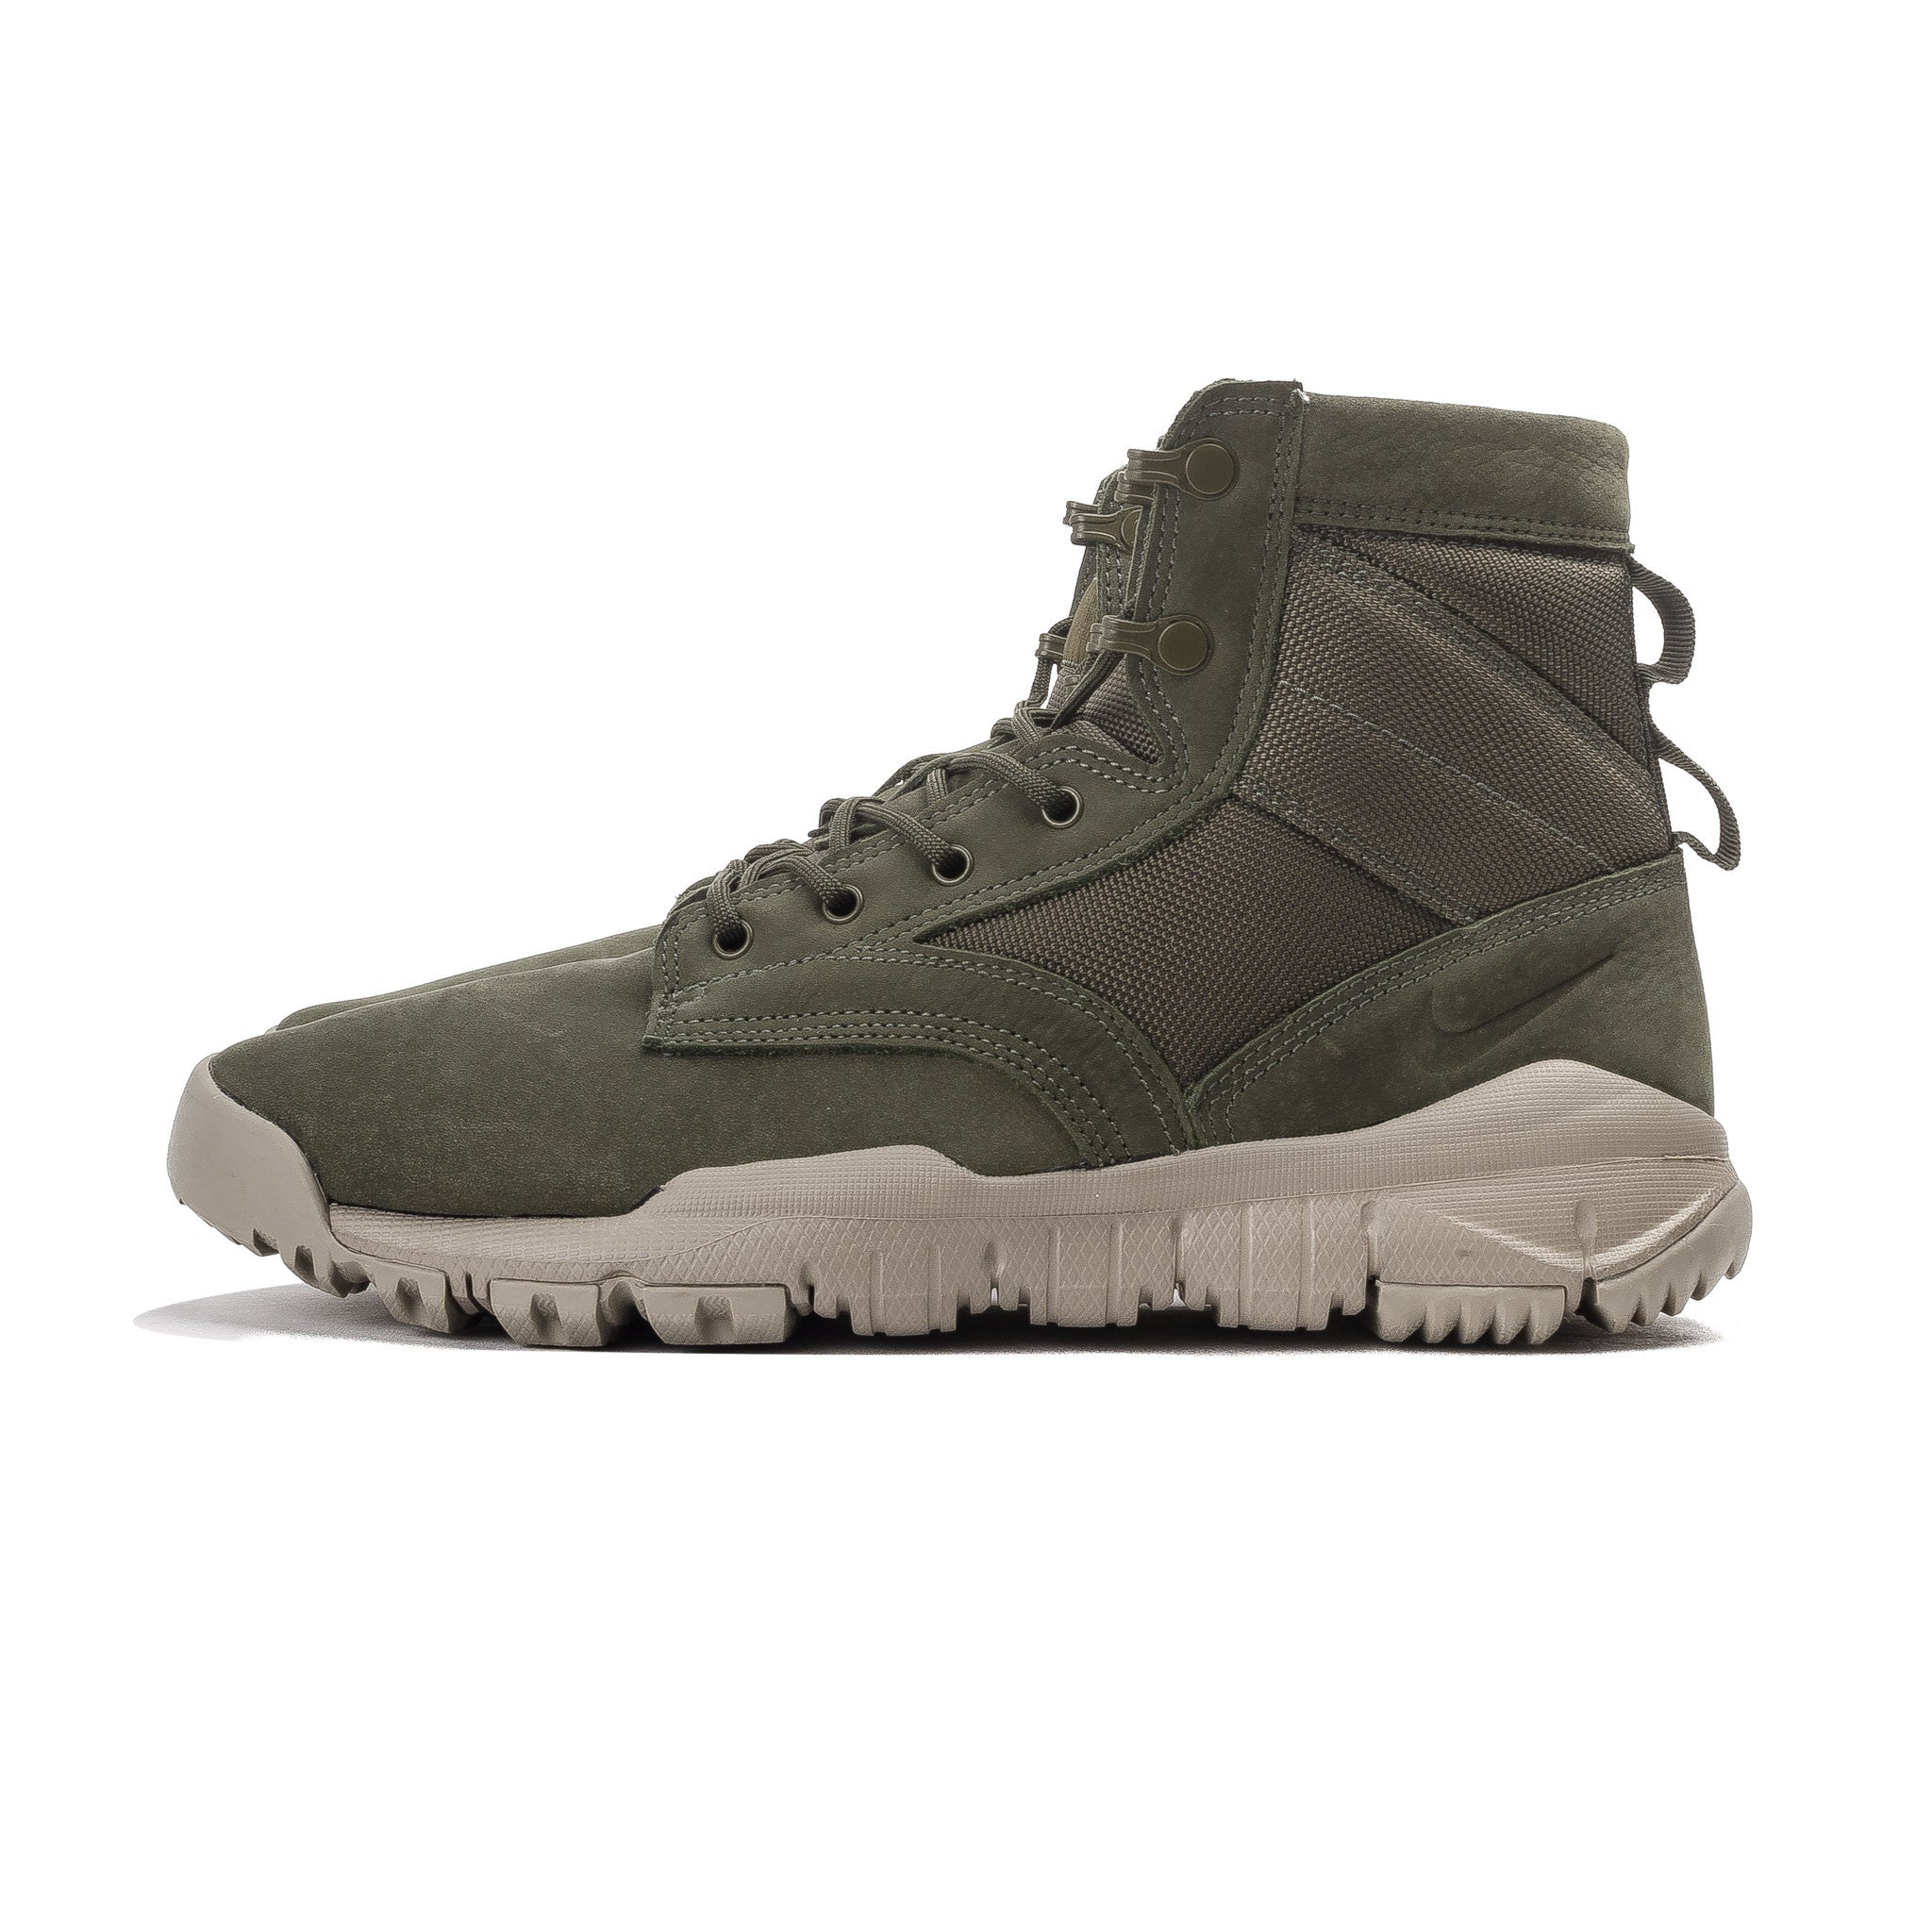 nike 004 sticky rubber boots